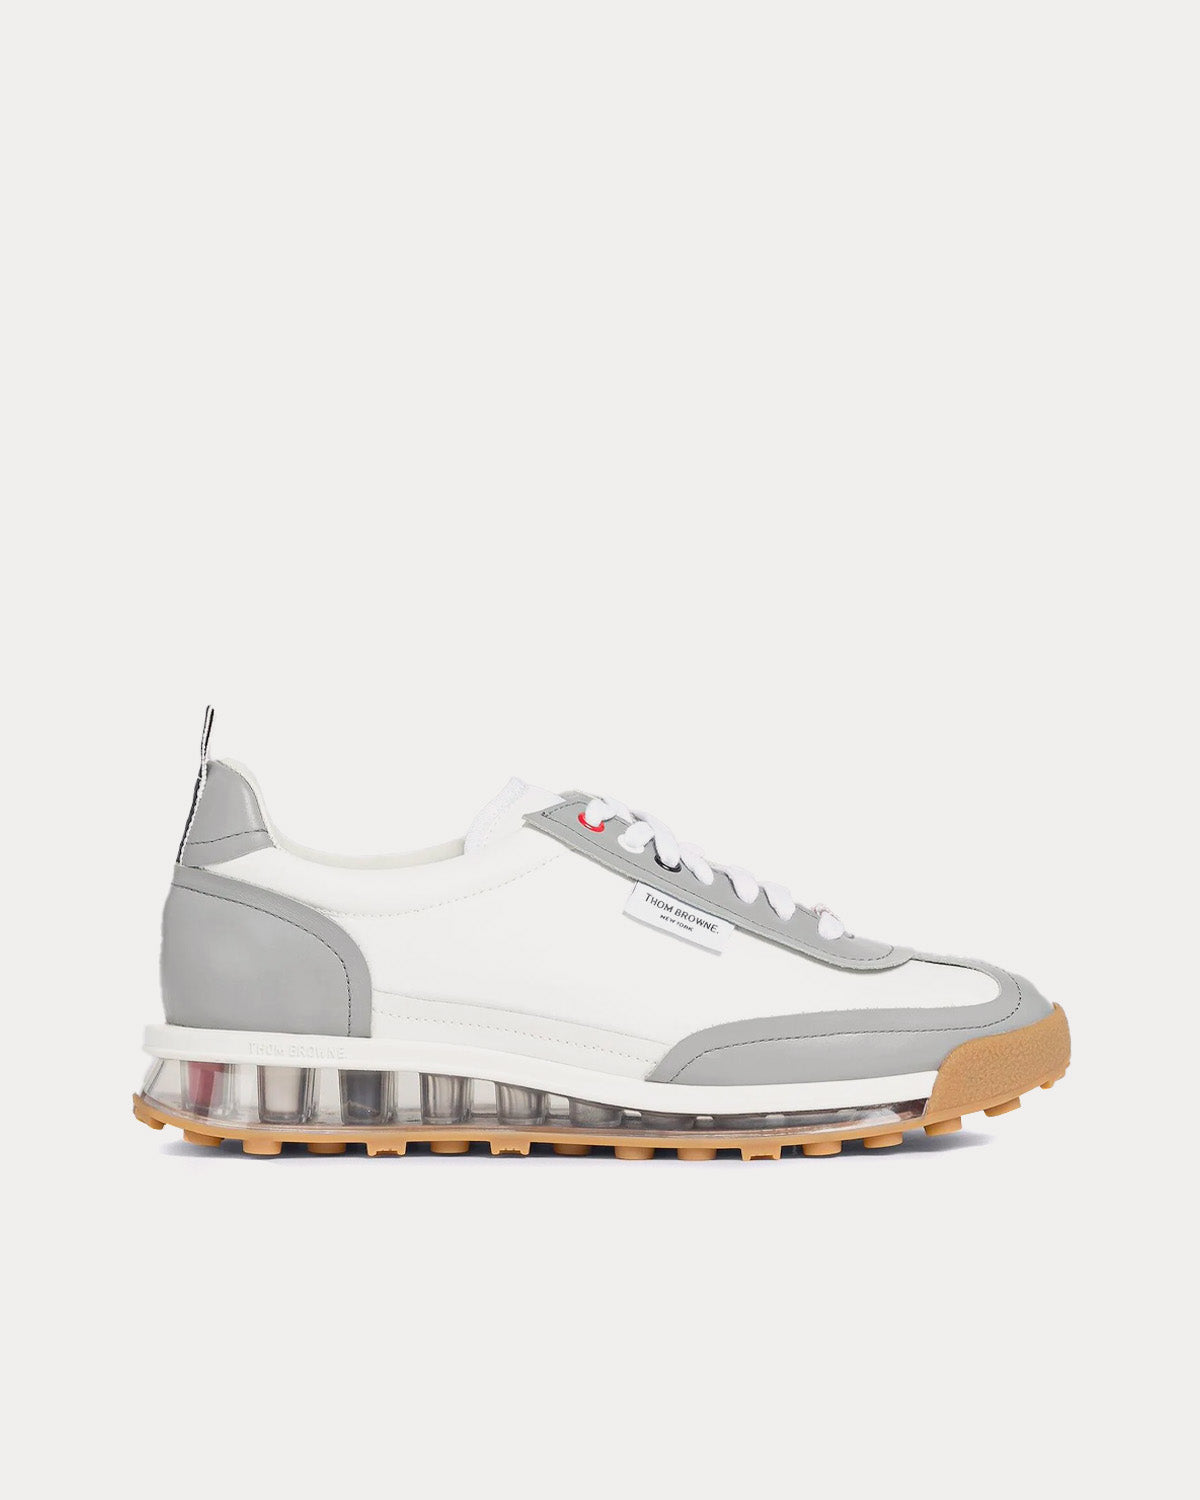 Thom Browne - Tech Runner Clear Sole Raw Edge Vitello Calf White / Grey Low Top Sneakers